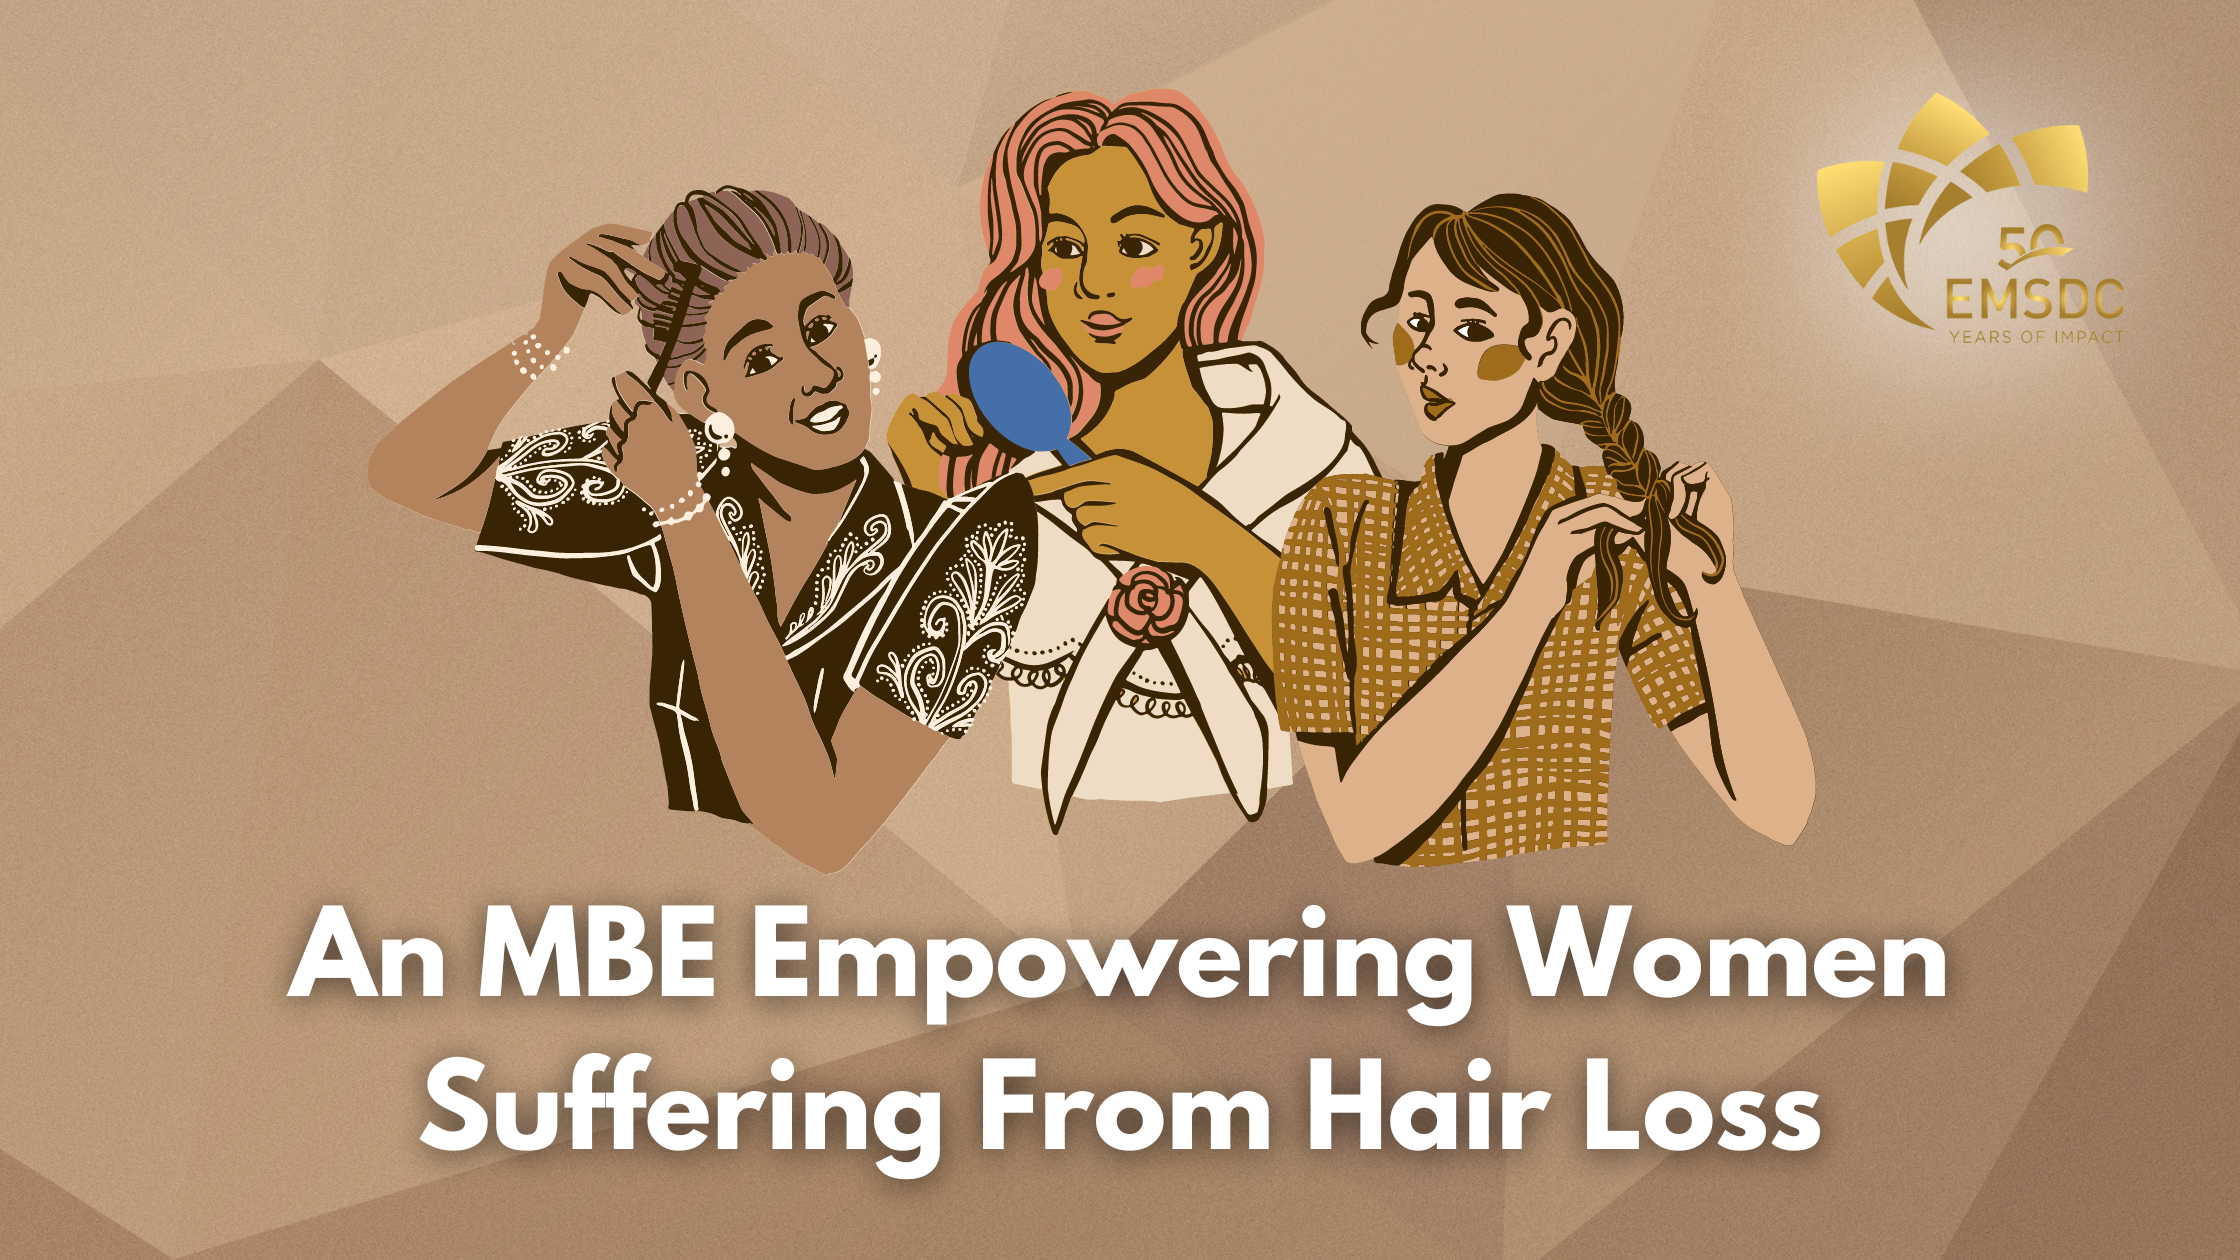 An MBE Empowering Women Suffering From Hair Loss — EMSDC